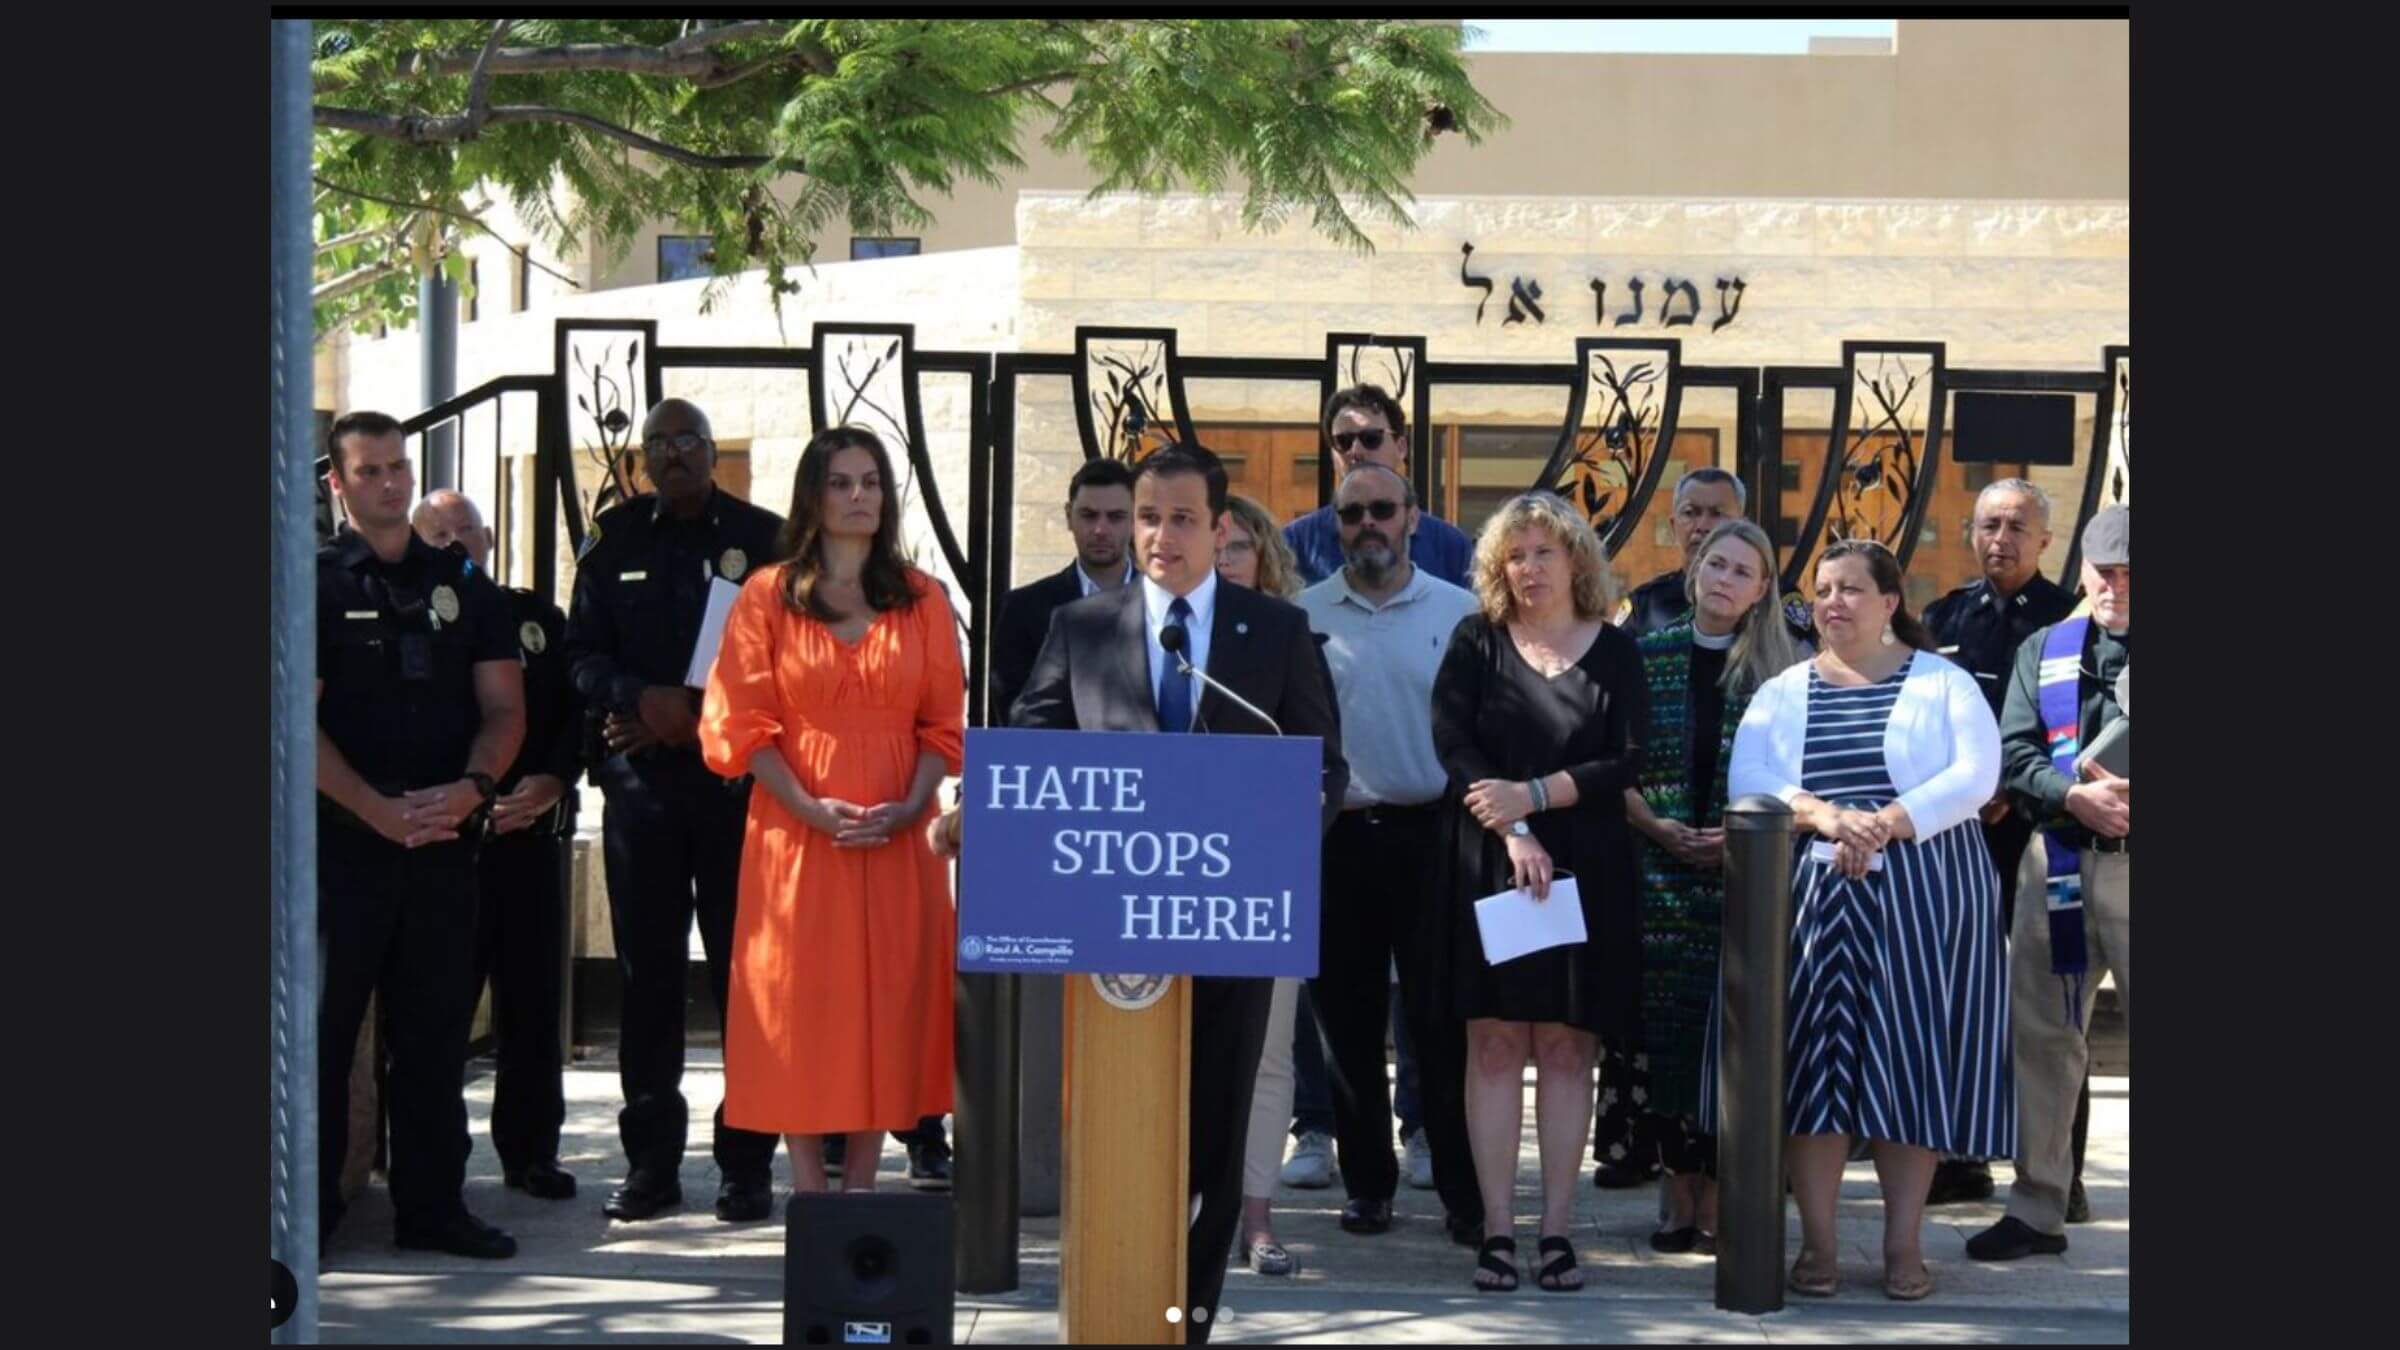 San Diego City Councilman Raul Campillo, standing at the podium, discusses a proposal to increase penalties for 'hate litter' at a news conference.